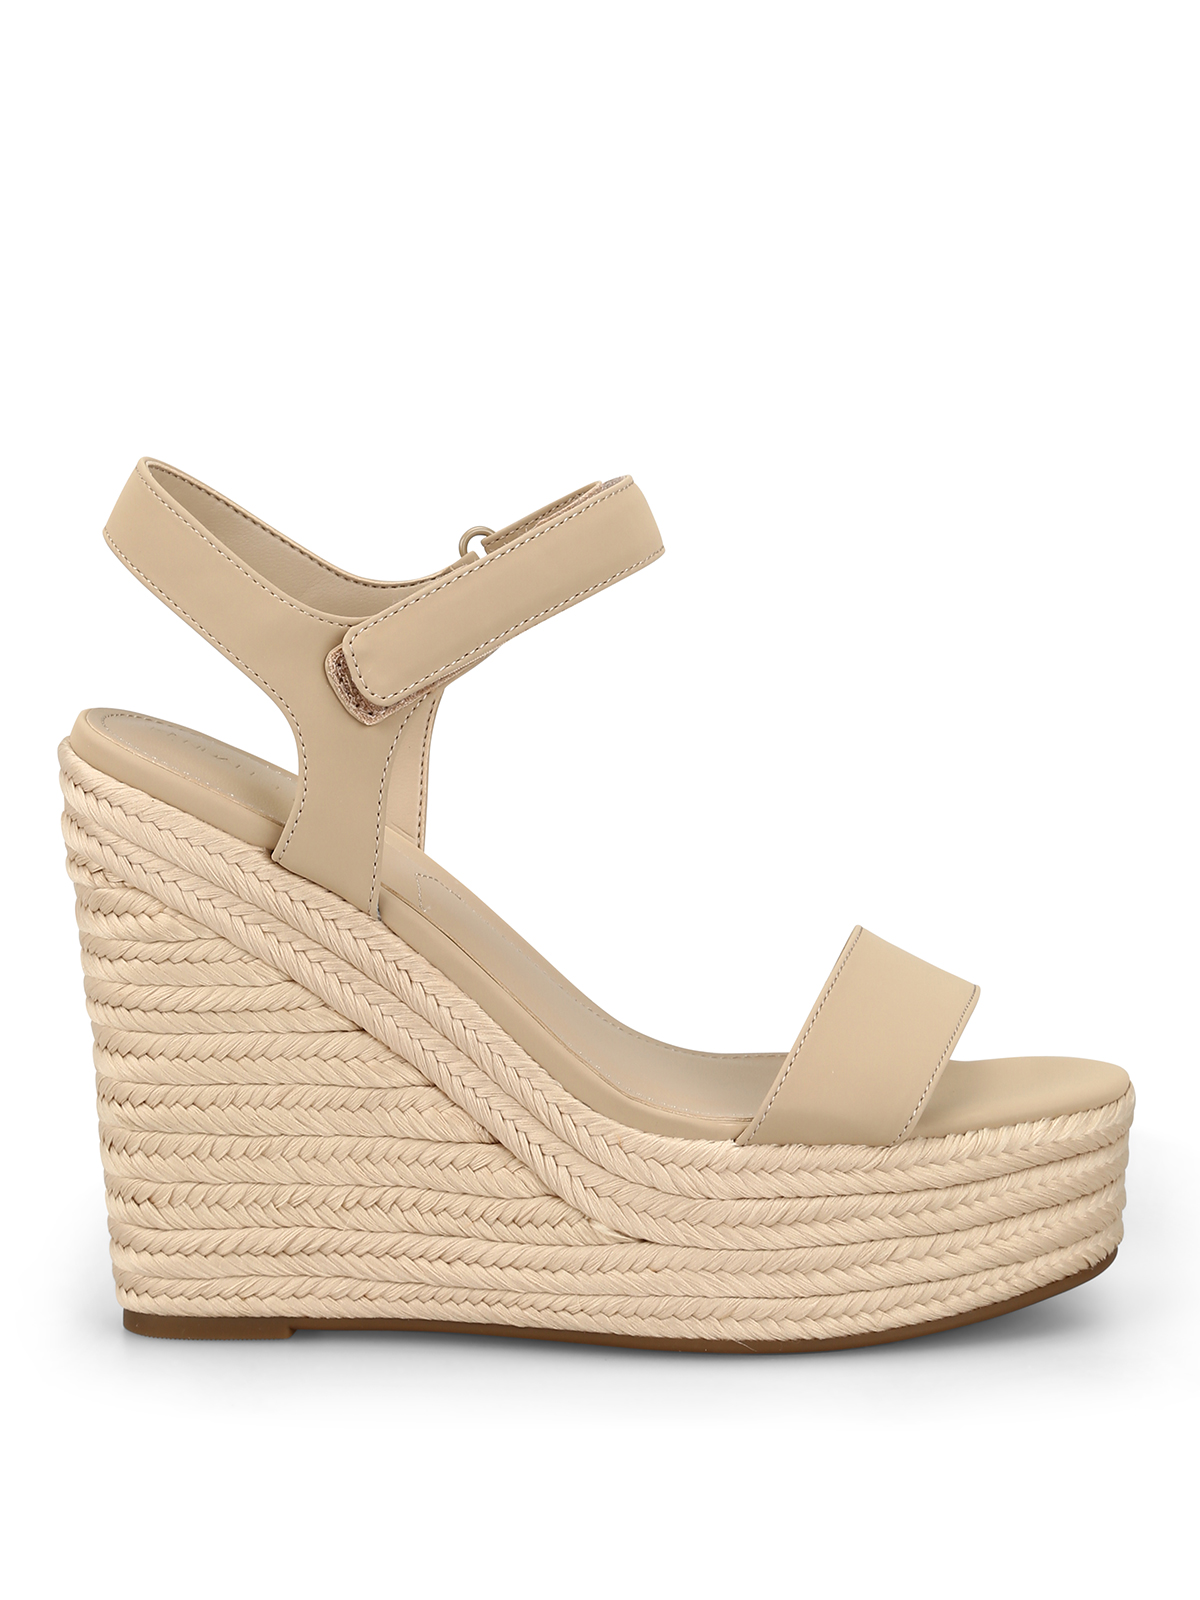 KENDALL + KYLIE GRAND SUEDE LEATHER WEDGE SANDALS